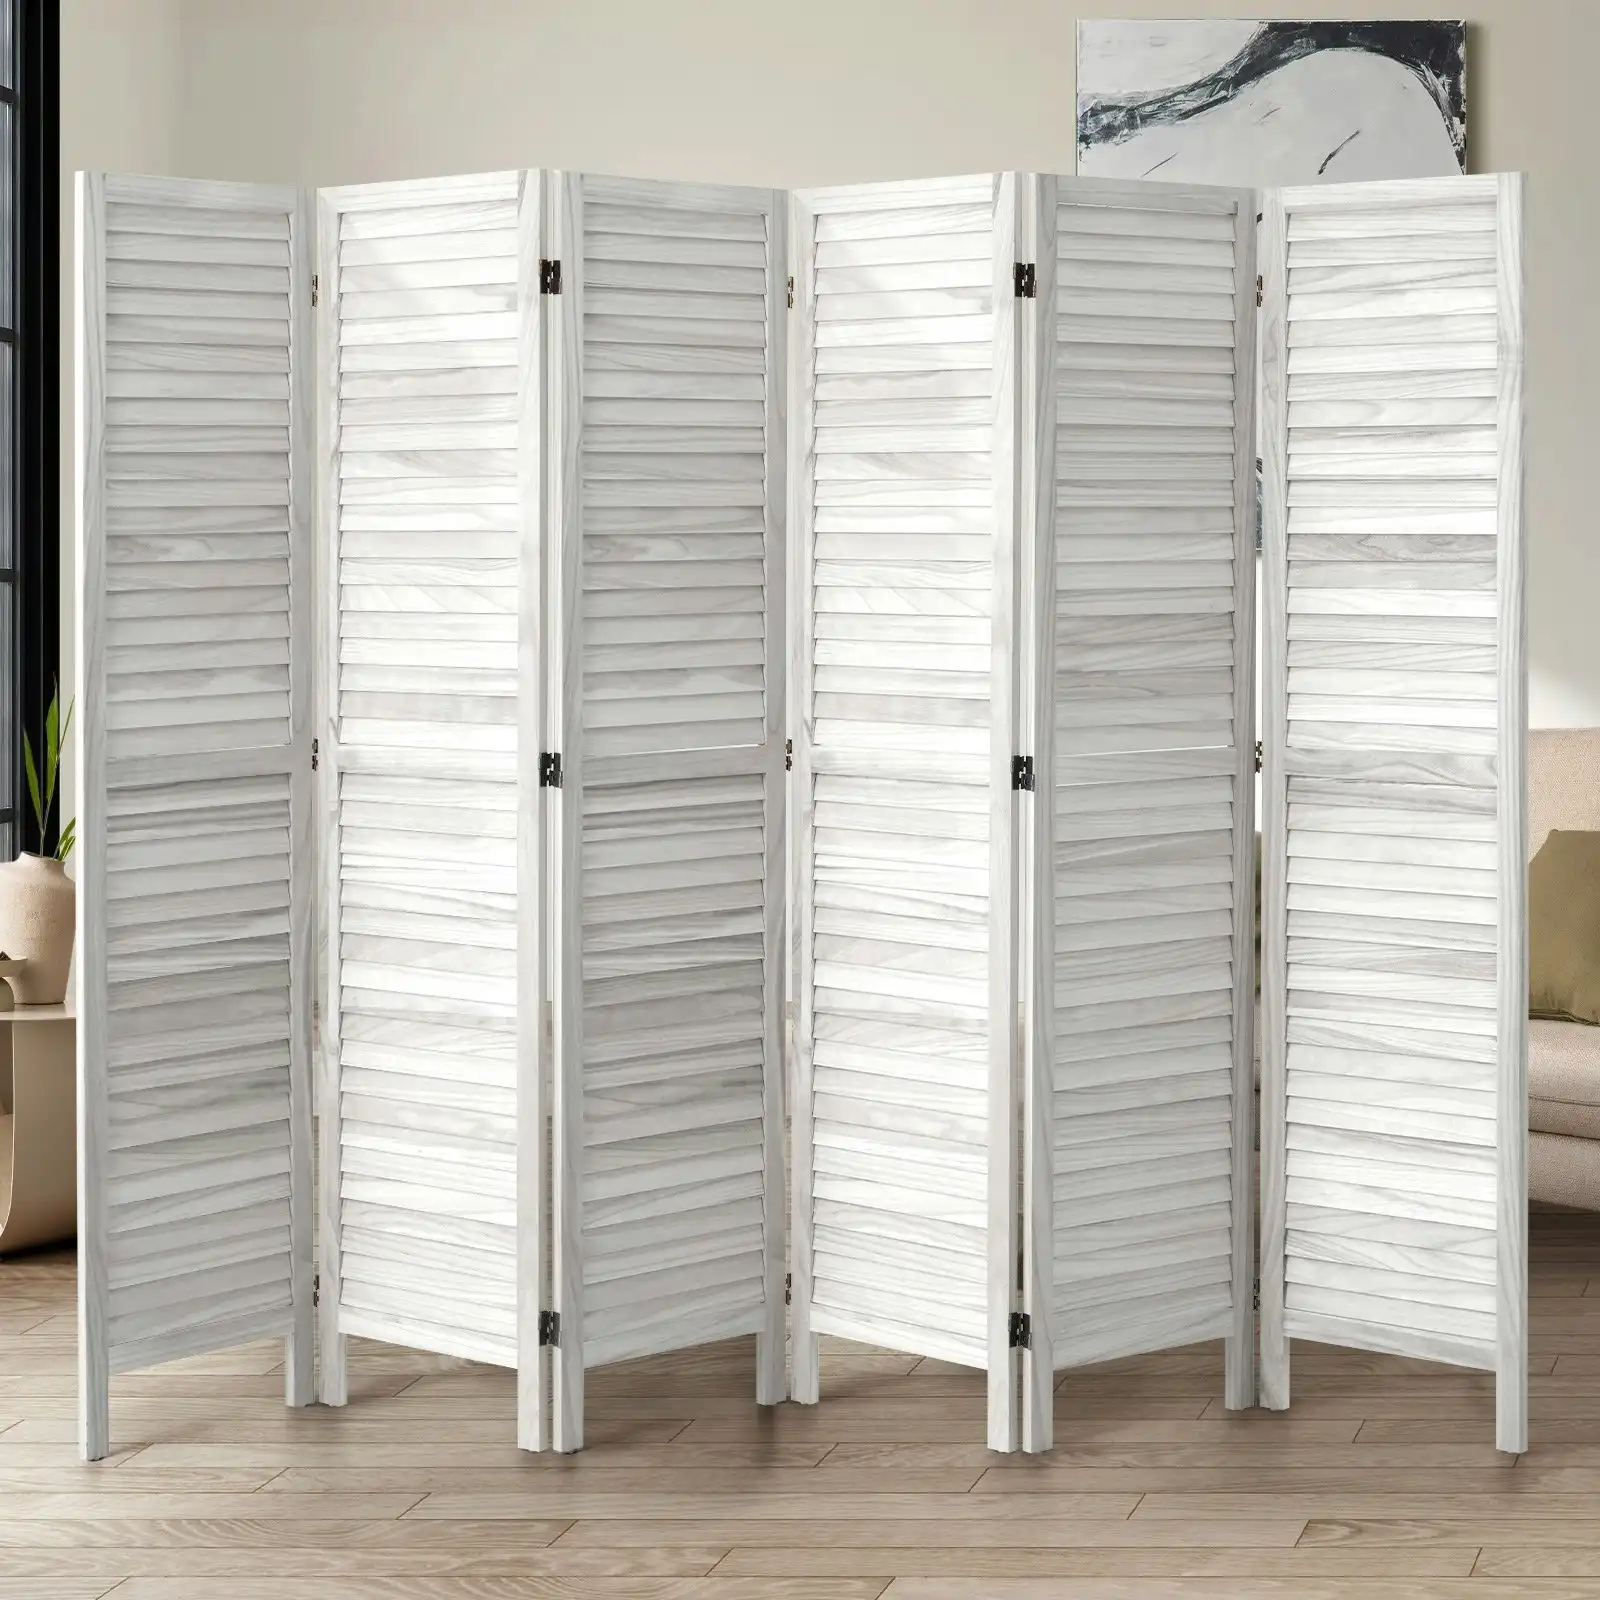 Oikiture 6 Panel Room Divider Privacy Screen Partition Timber Wooden Fold White